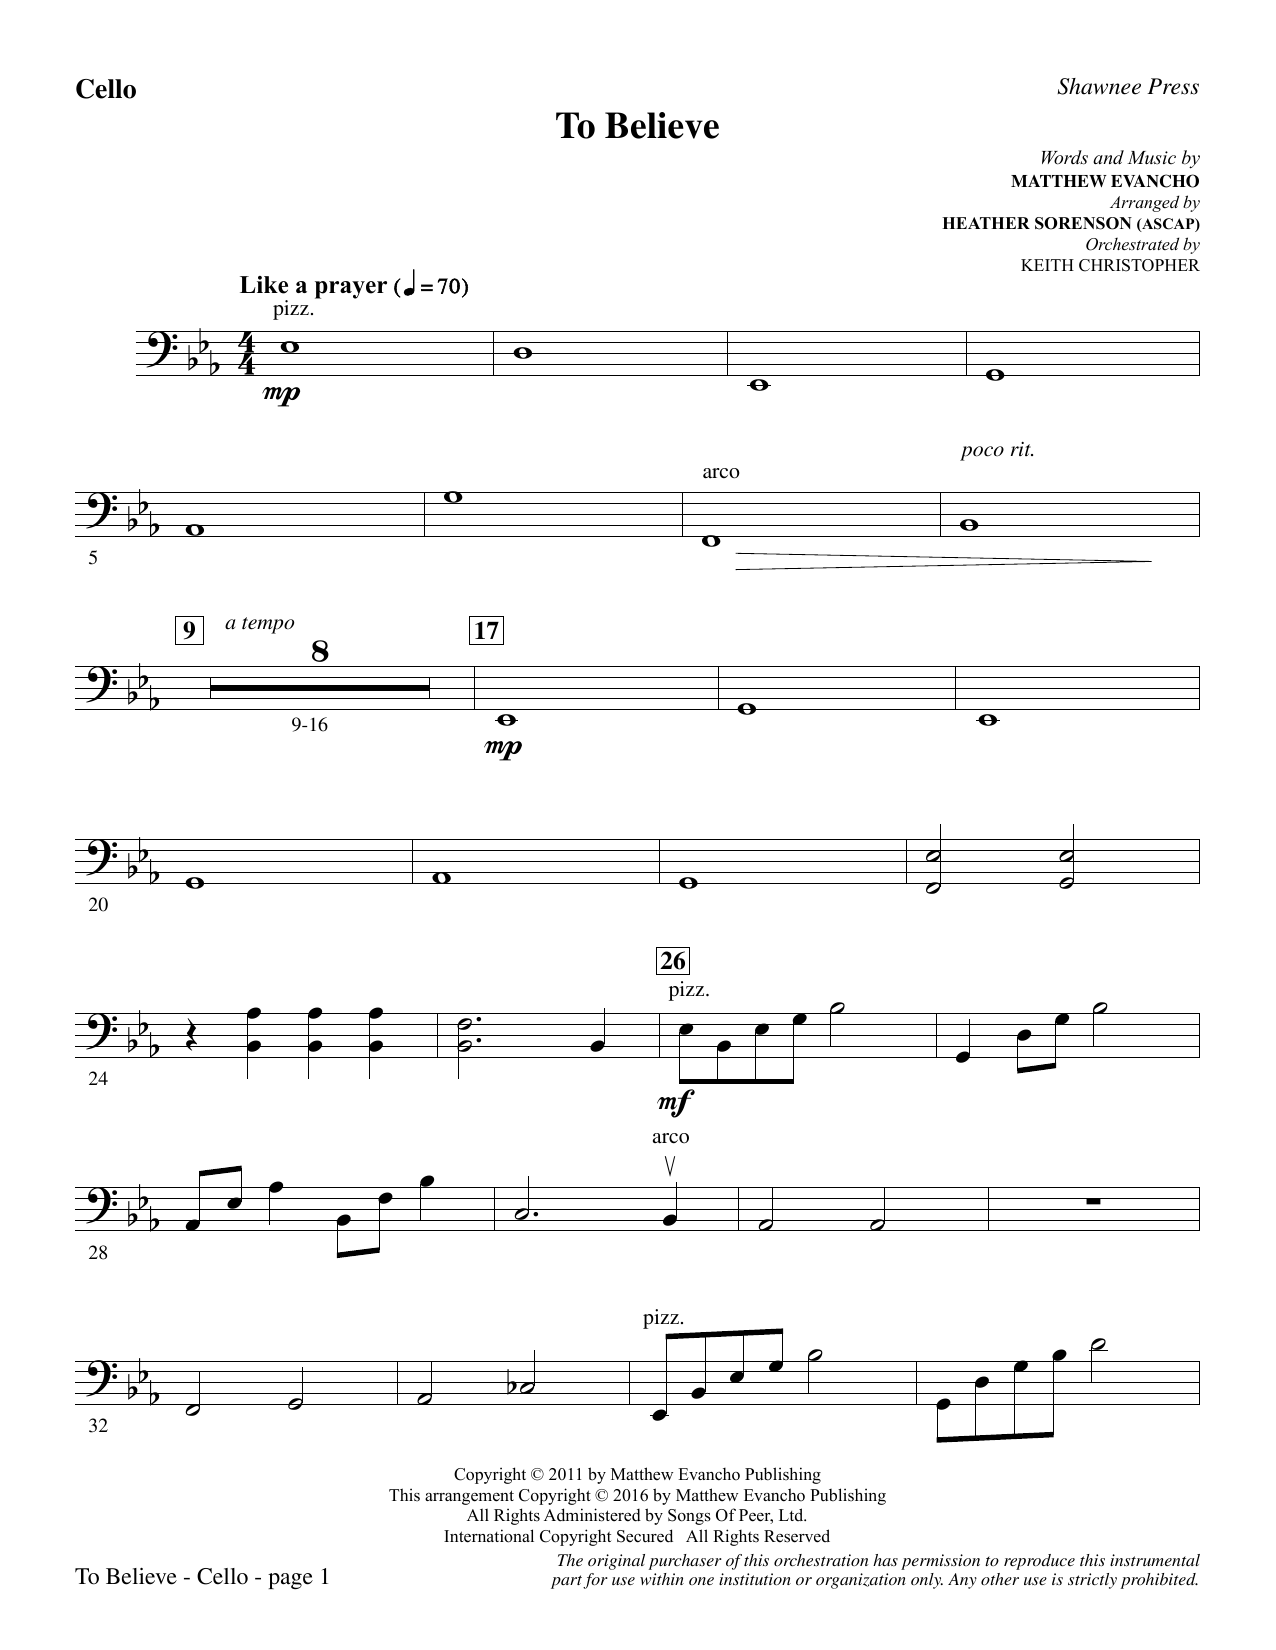 Download Heather Sorenson To Believe - Cello sheet music and printable PDF score & Inspirational music notes